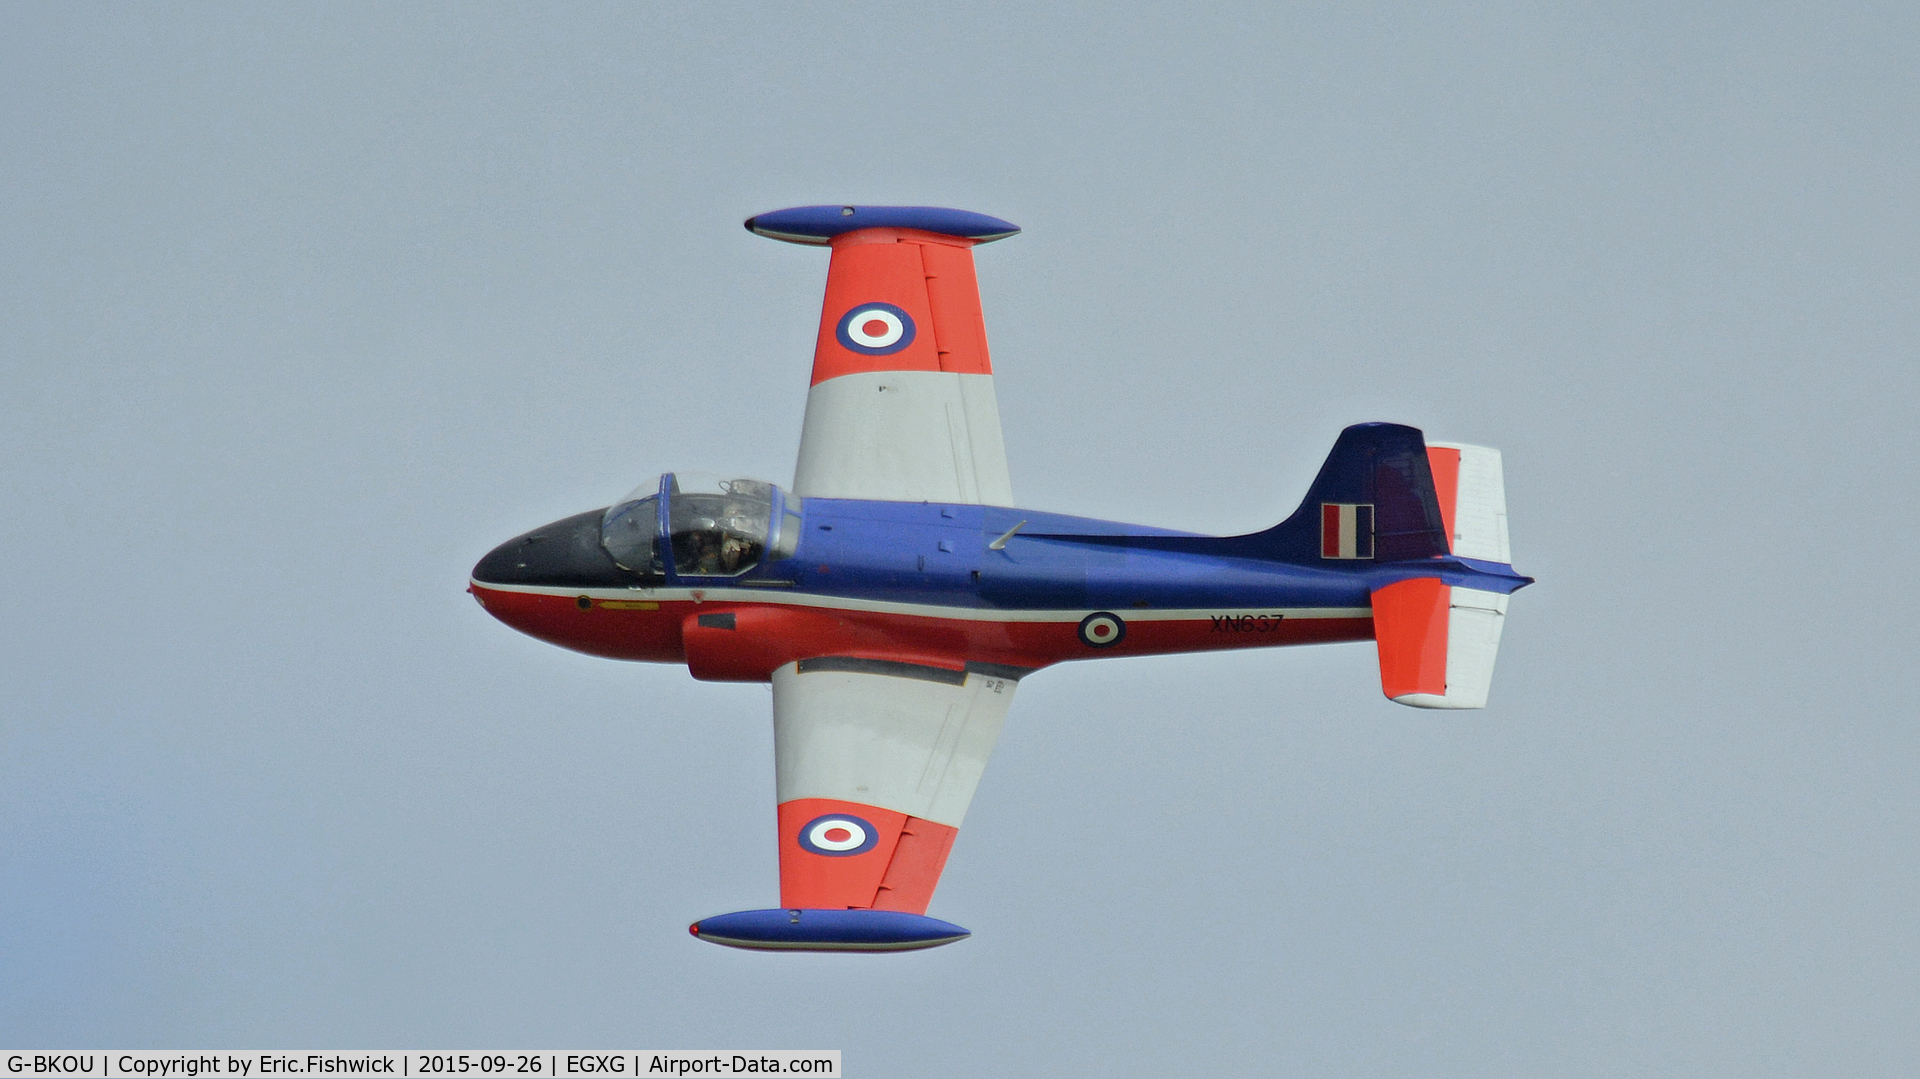 G-BKOU, 1961 Hunting P-84 Jet Provost T.3 C/N PAC/W/13901, 41. G-BKOU in display mode at The Yorkshire Air Show, Church Fenton, Sept. 2015.